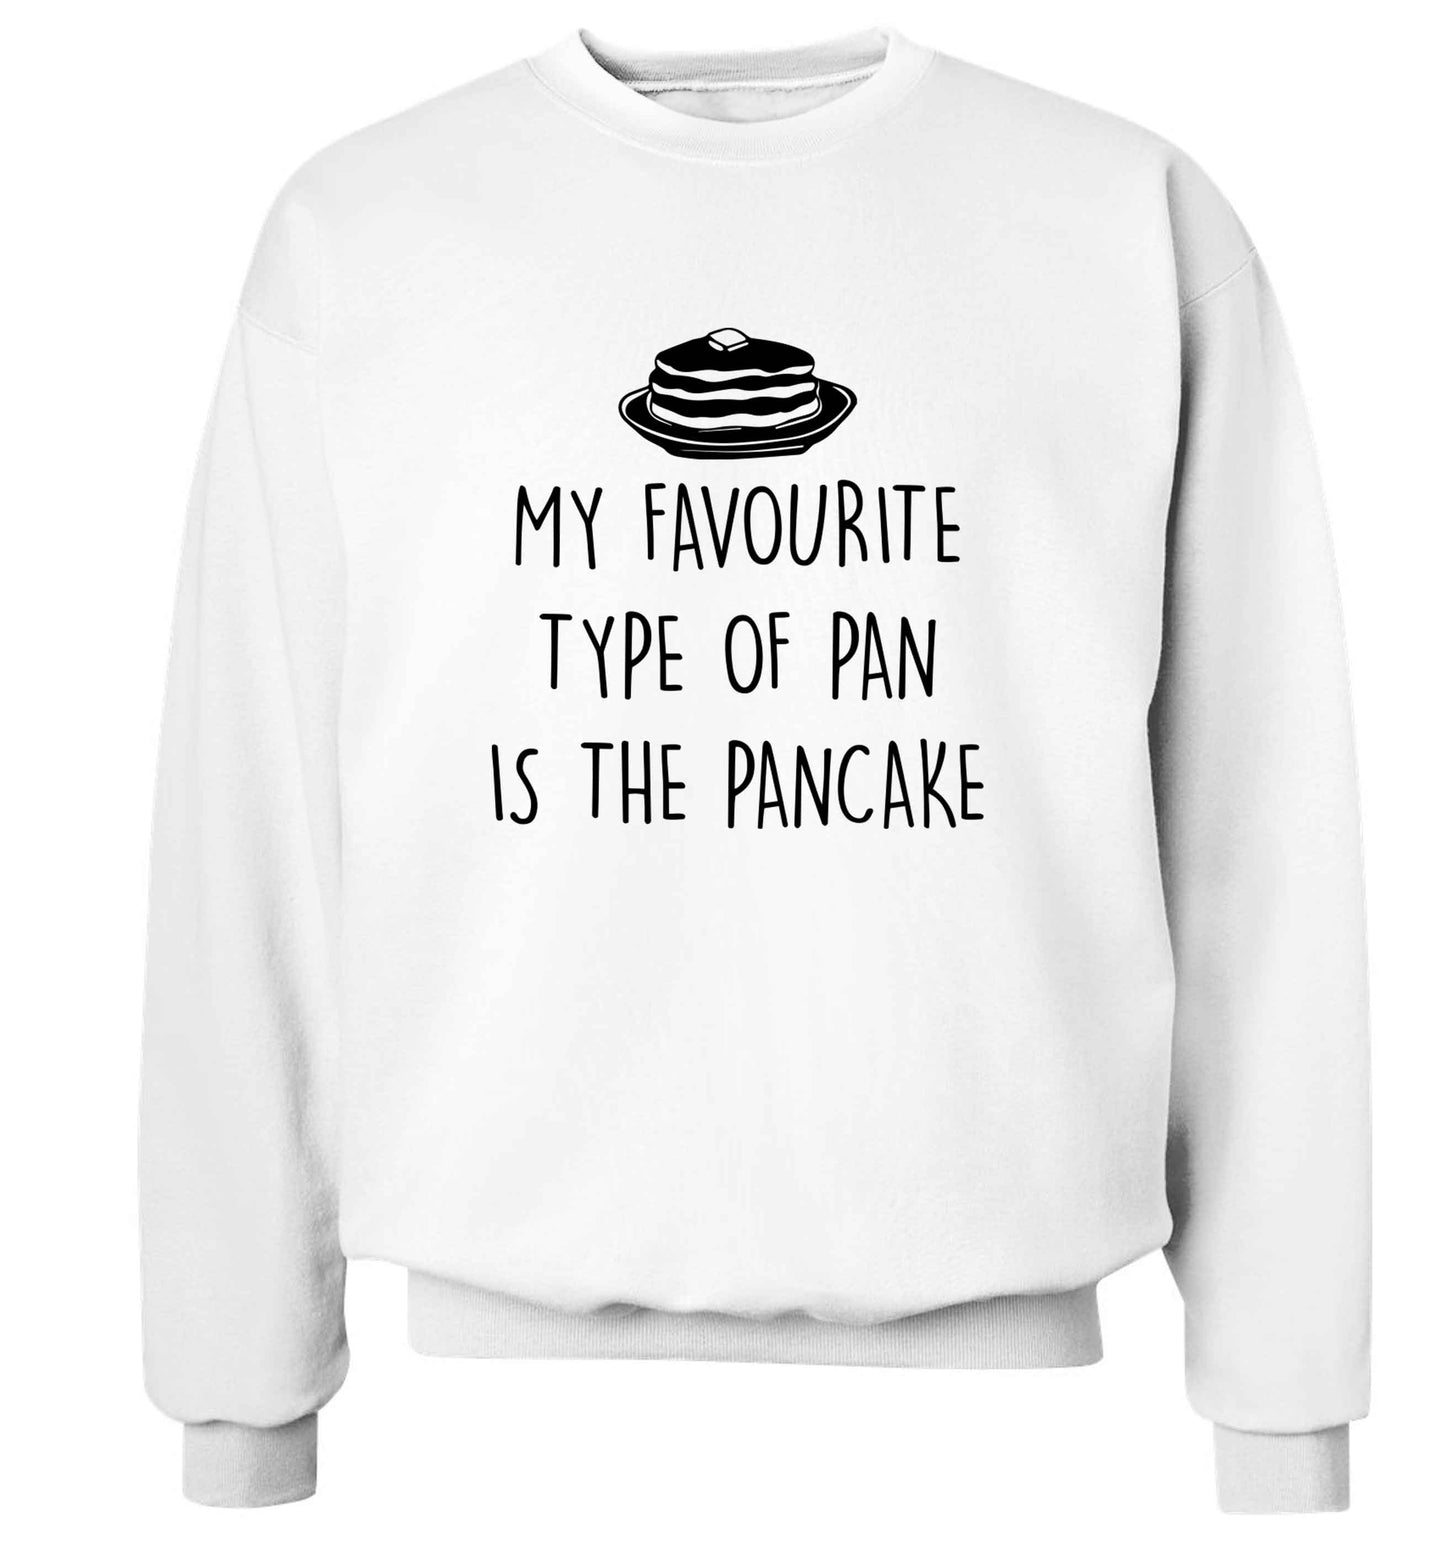 My favourite type of pan is the pancake adult's unisex white sweater 2XL